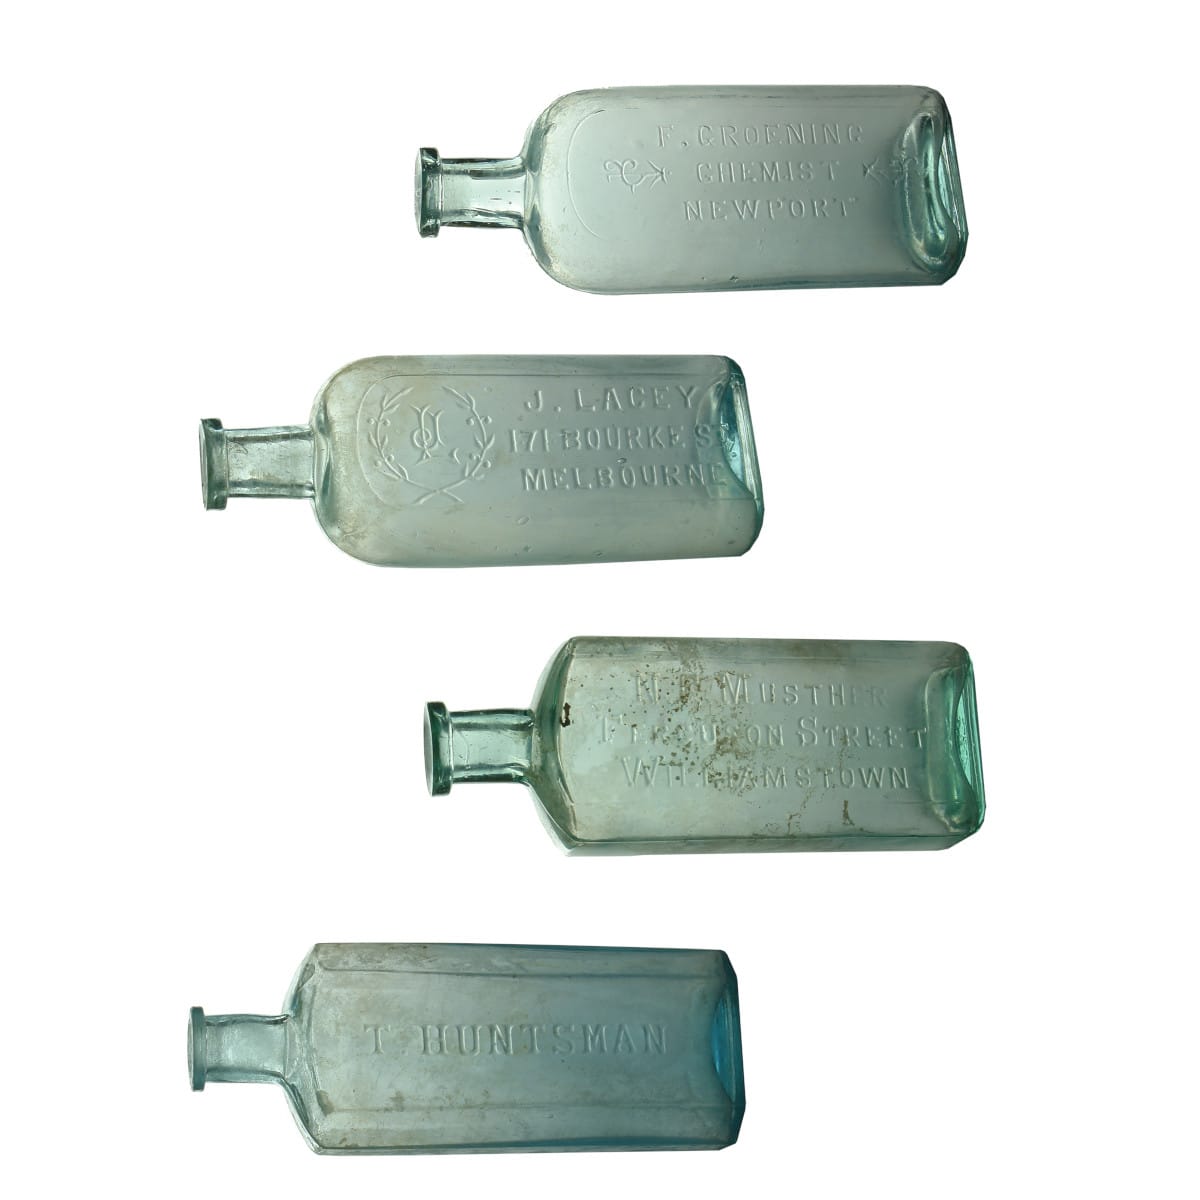 Four suburban Melbourne Chemist Bottles: Huntsman; Musther, Williamstown; Lacey, Melbourne and Groening, Newport. (Victoria)